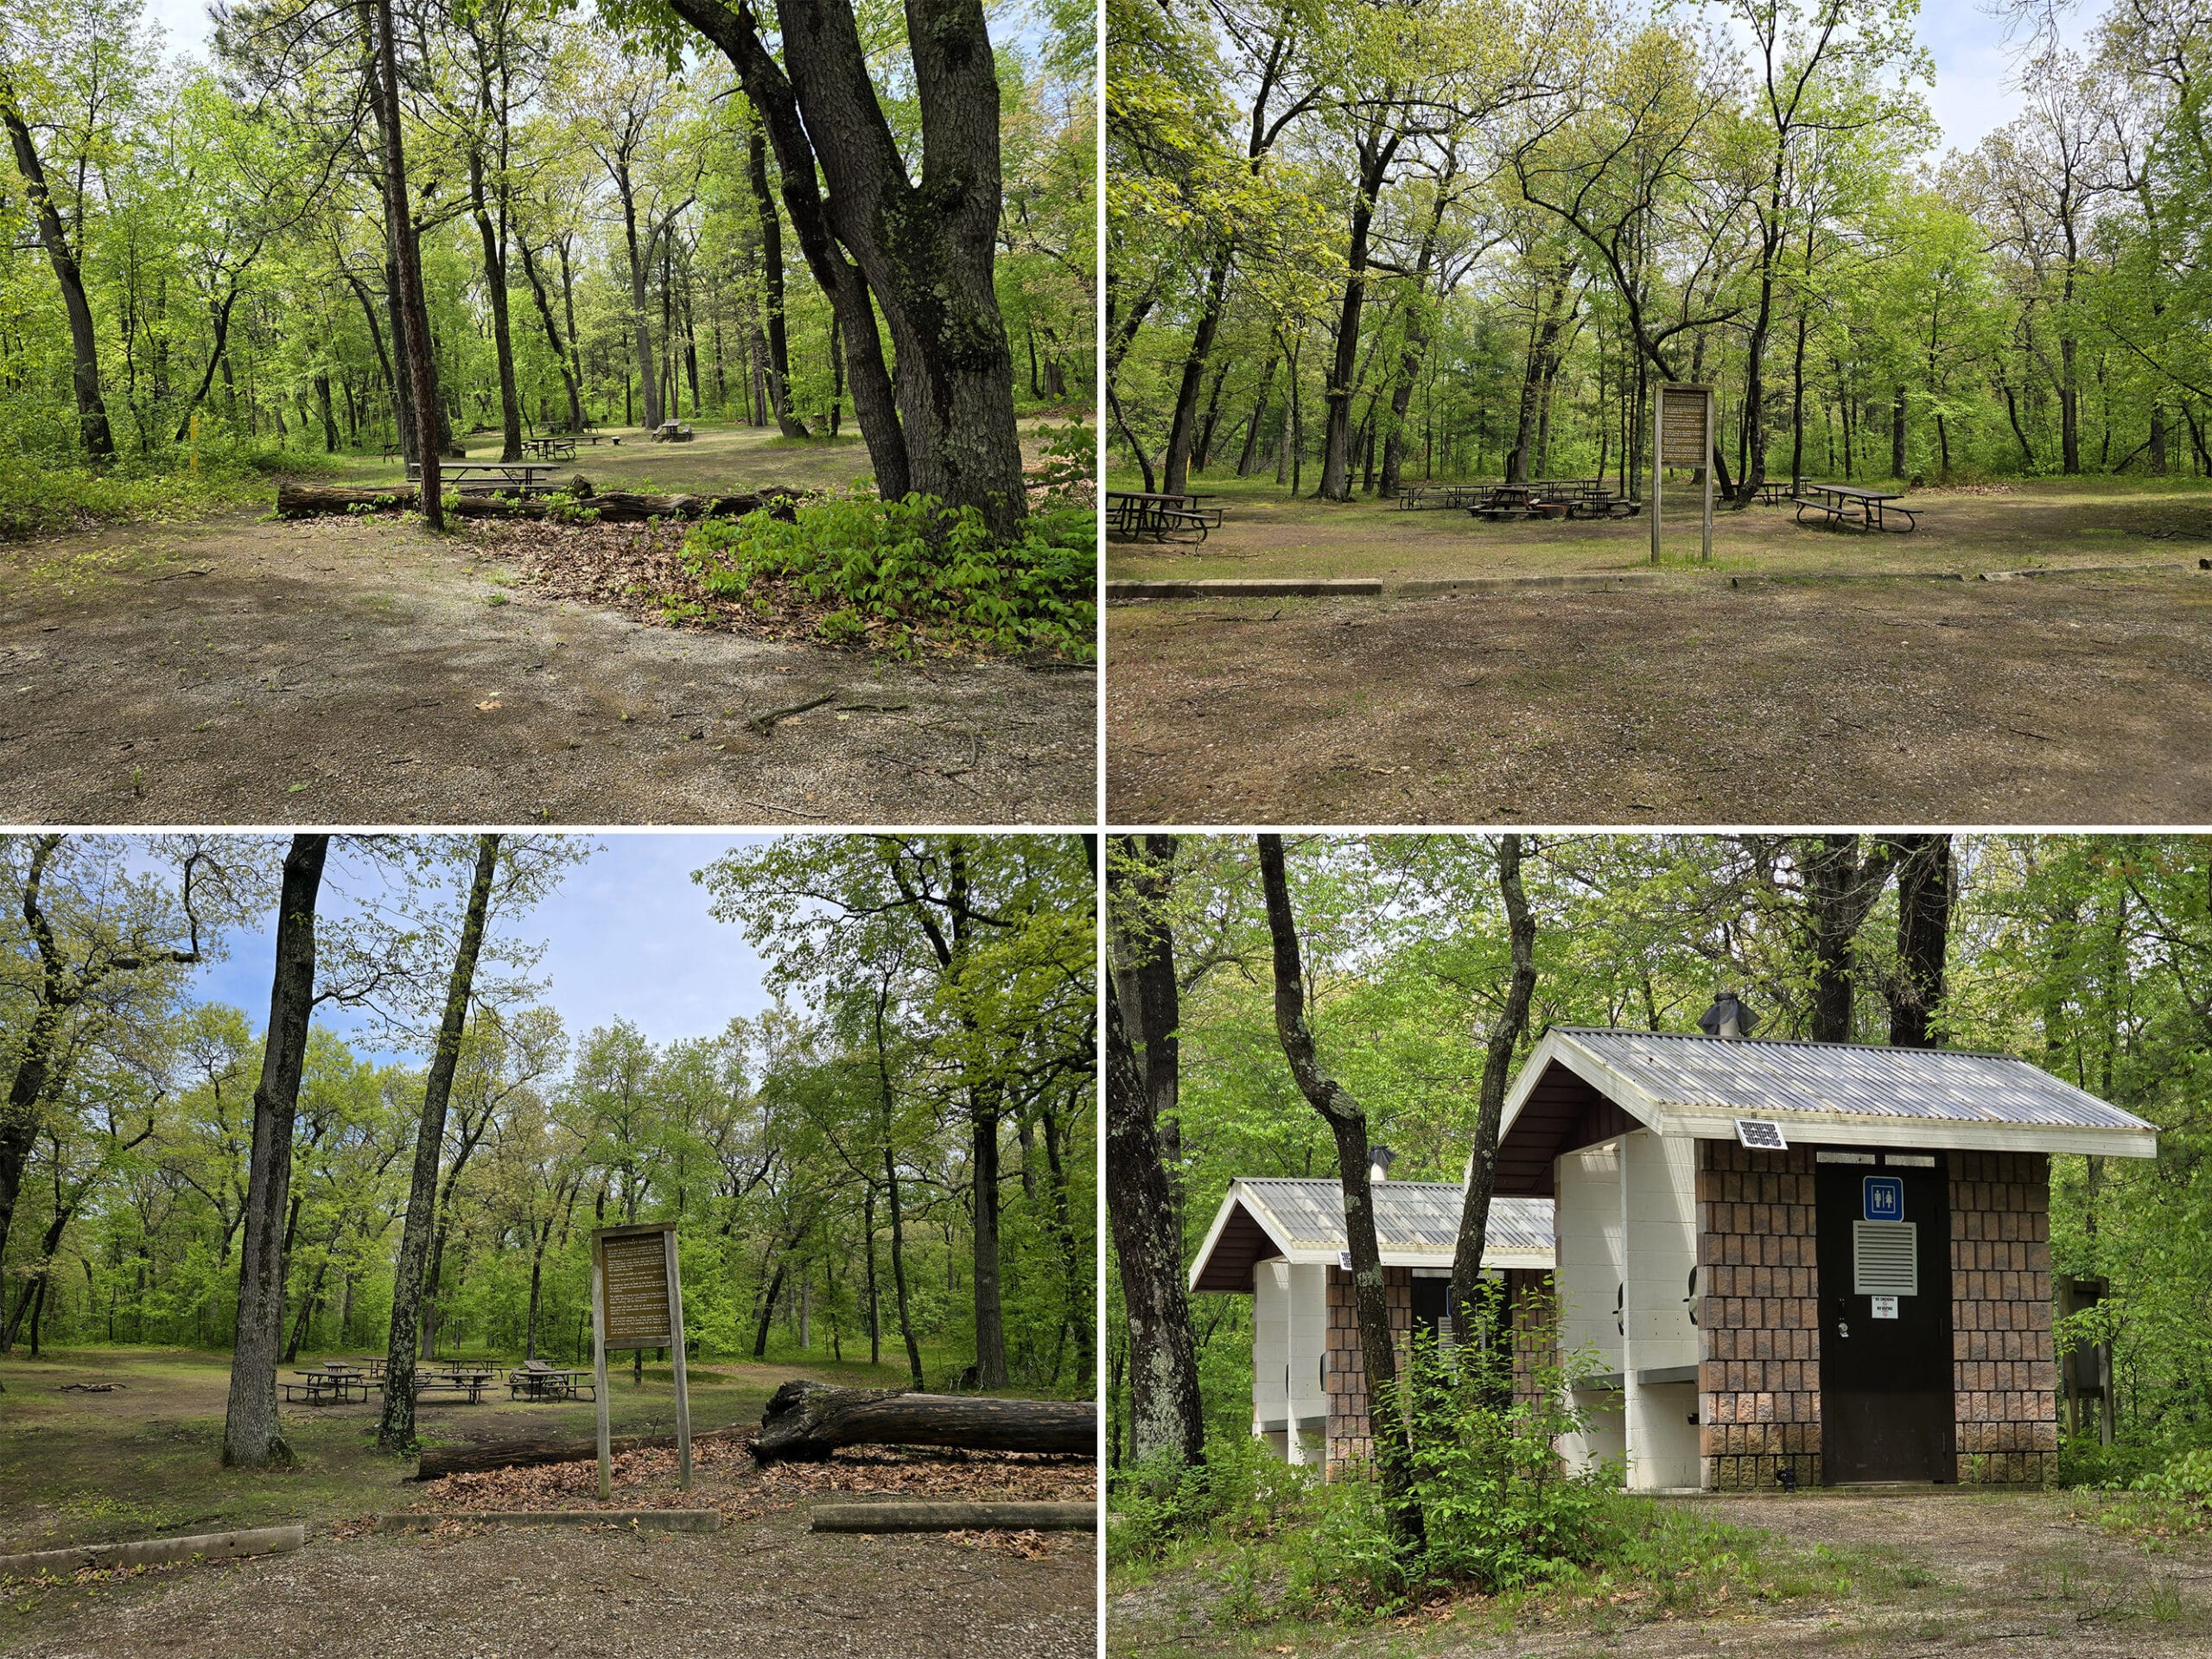 4 part image showing 3 group camp sites at Pinery, as well as the bathroom building for it.